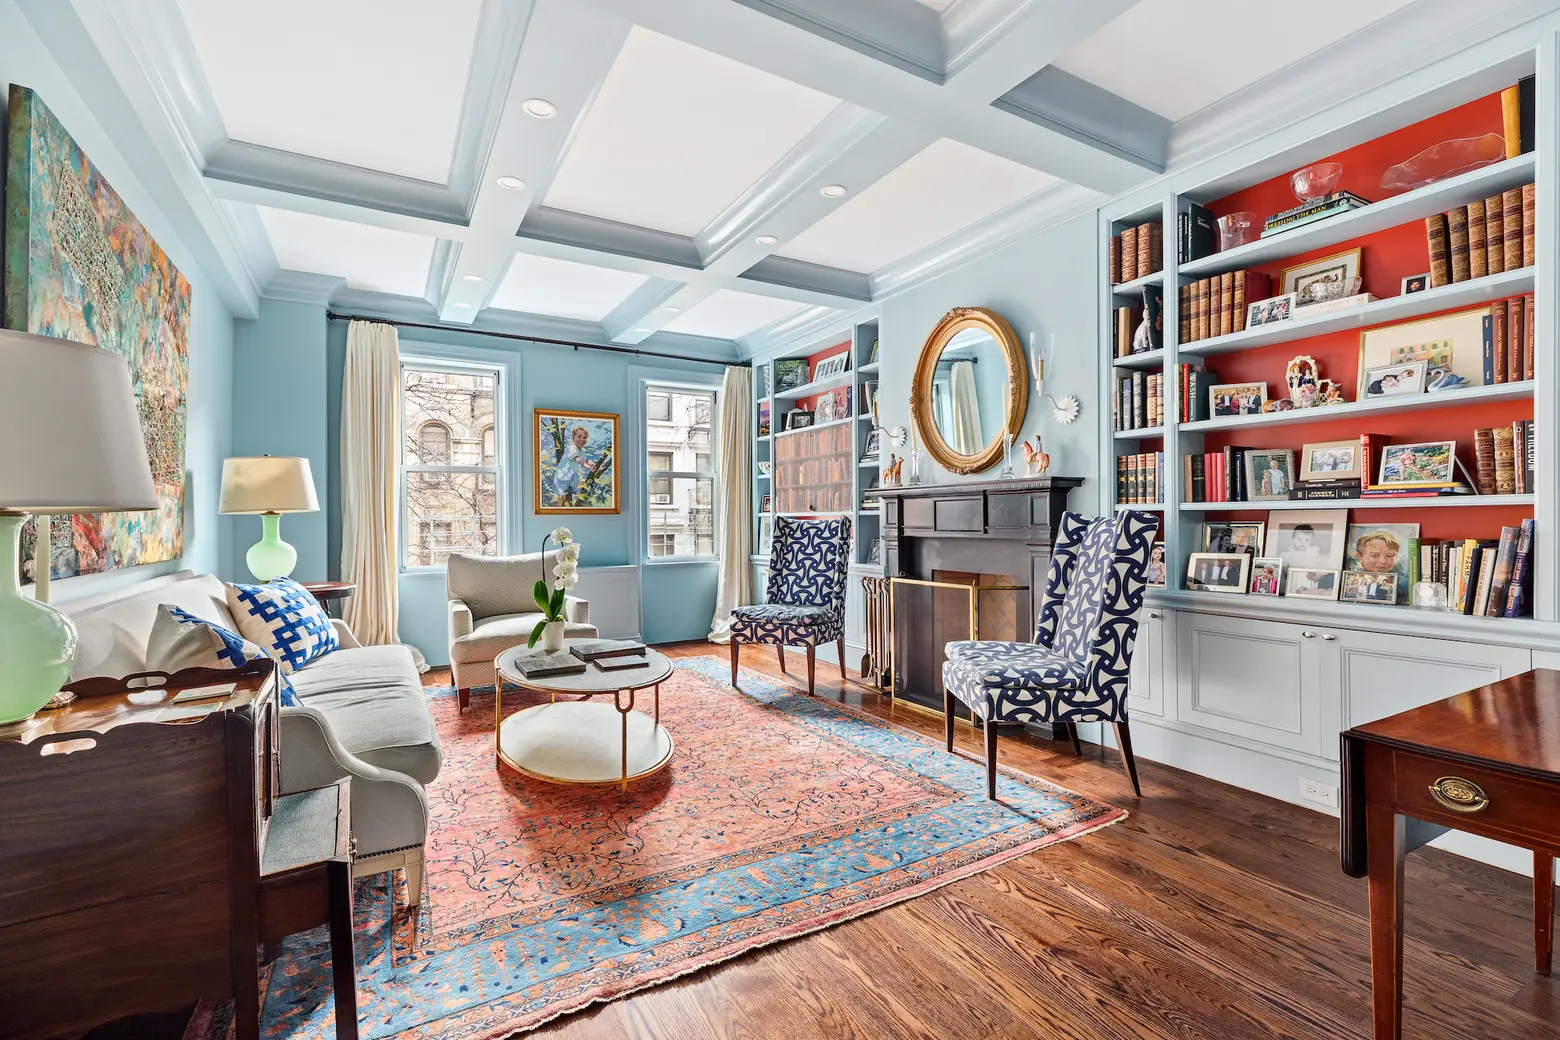 Rich colors and a classic reno define this $2.9M Upper East Side co-op